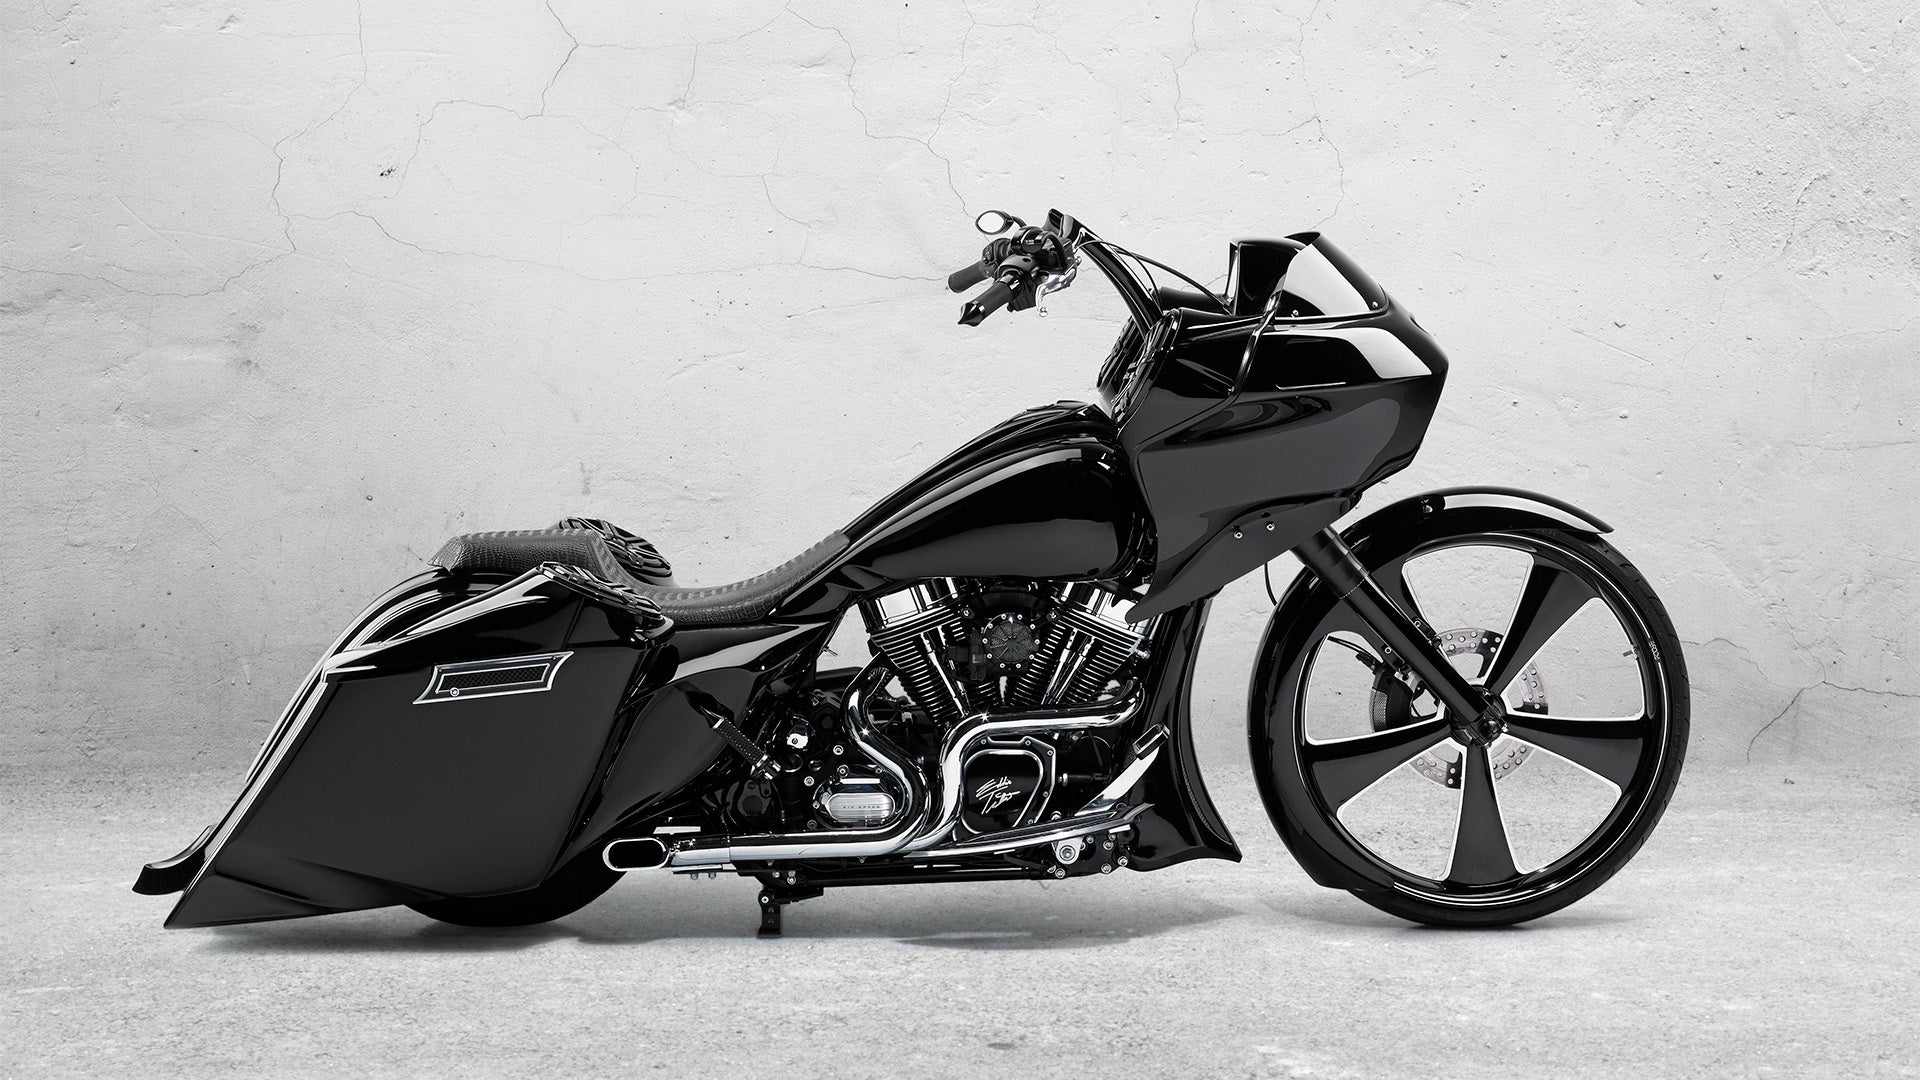 A black motorcycle side profile view.